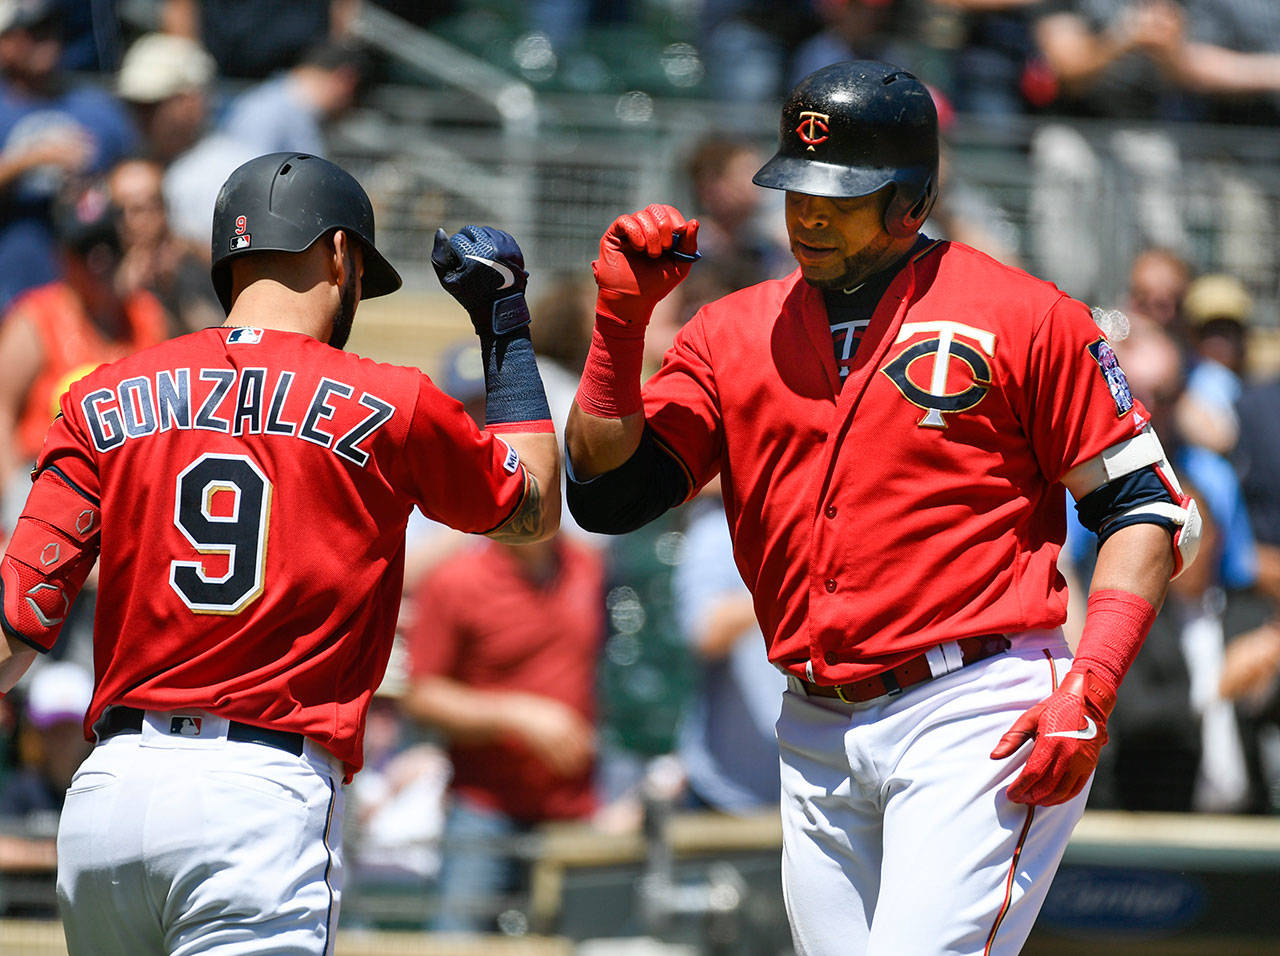 Twins designated hitter Nelson Cruz (right) celebrates with Marwin Gonzalez after hitting a solo home run during the third inning of a game against the Mariners on June 13, 2019, in Minneapolis. (AP Photo/Craig Lassig)